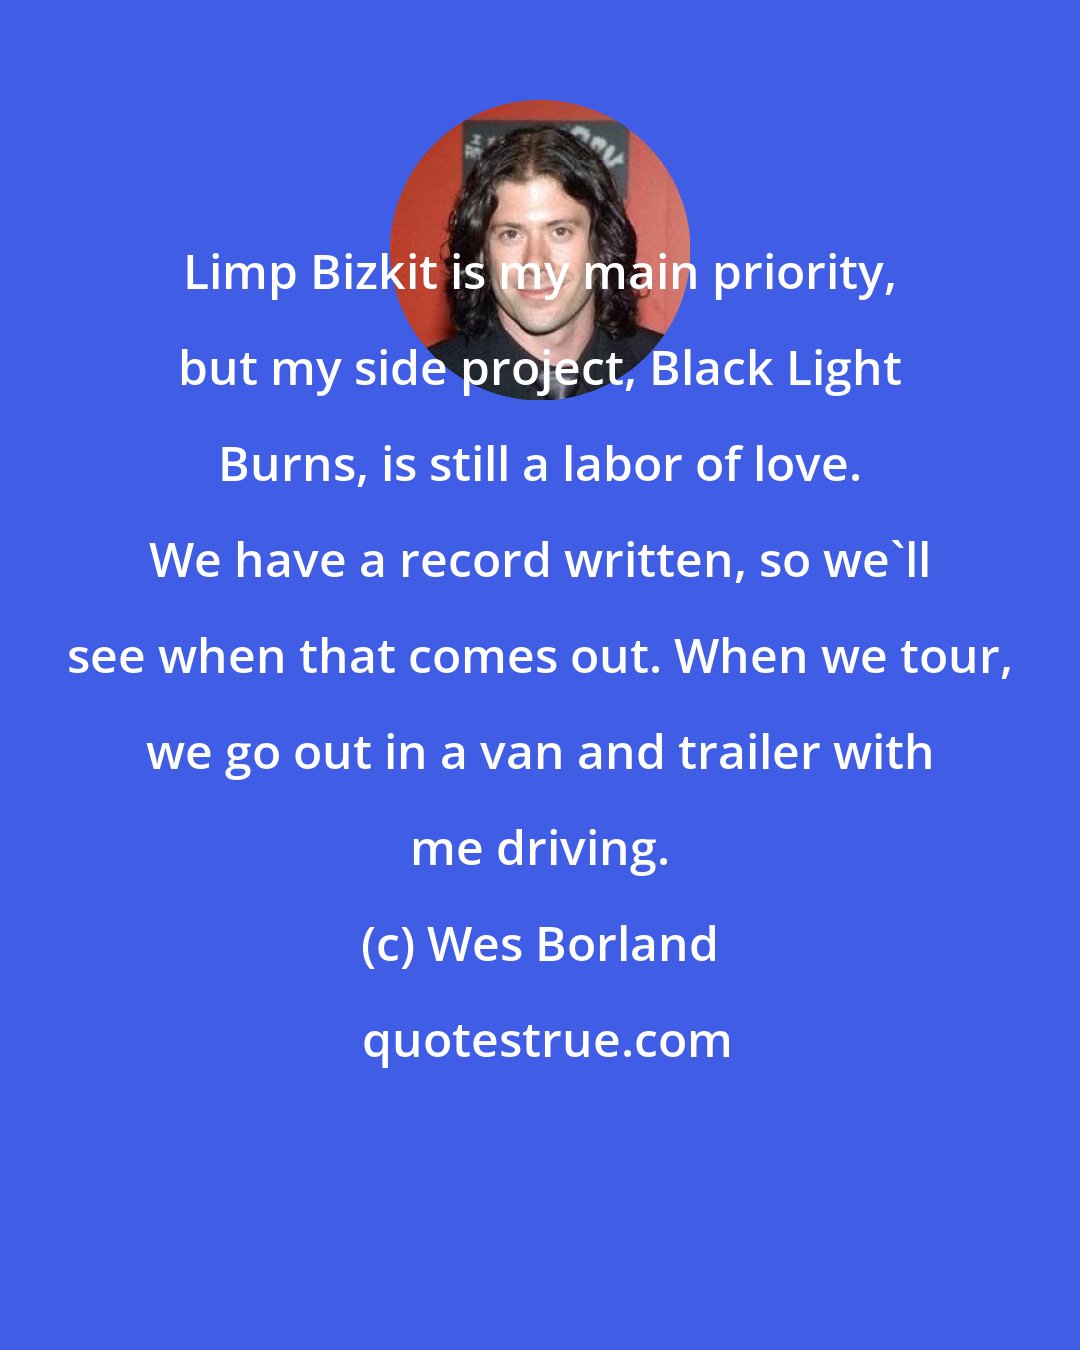 Wes Borland: Limp Bizkit is my main priority, but my side project, Black Light Burns, is still a labor of love. We have a record written, so we'll see when that comes out. When we tour, we go out in a van and trailer with me driving.